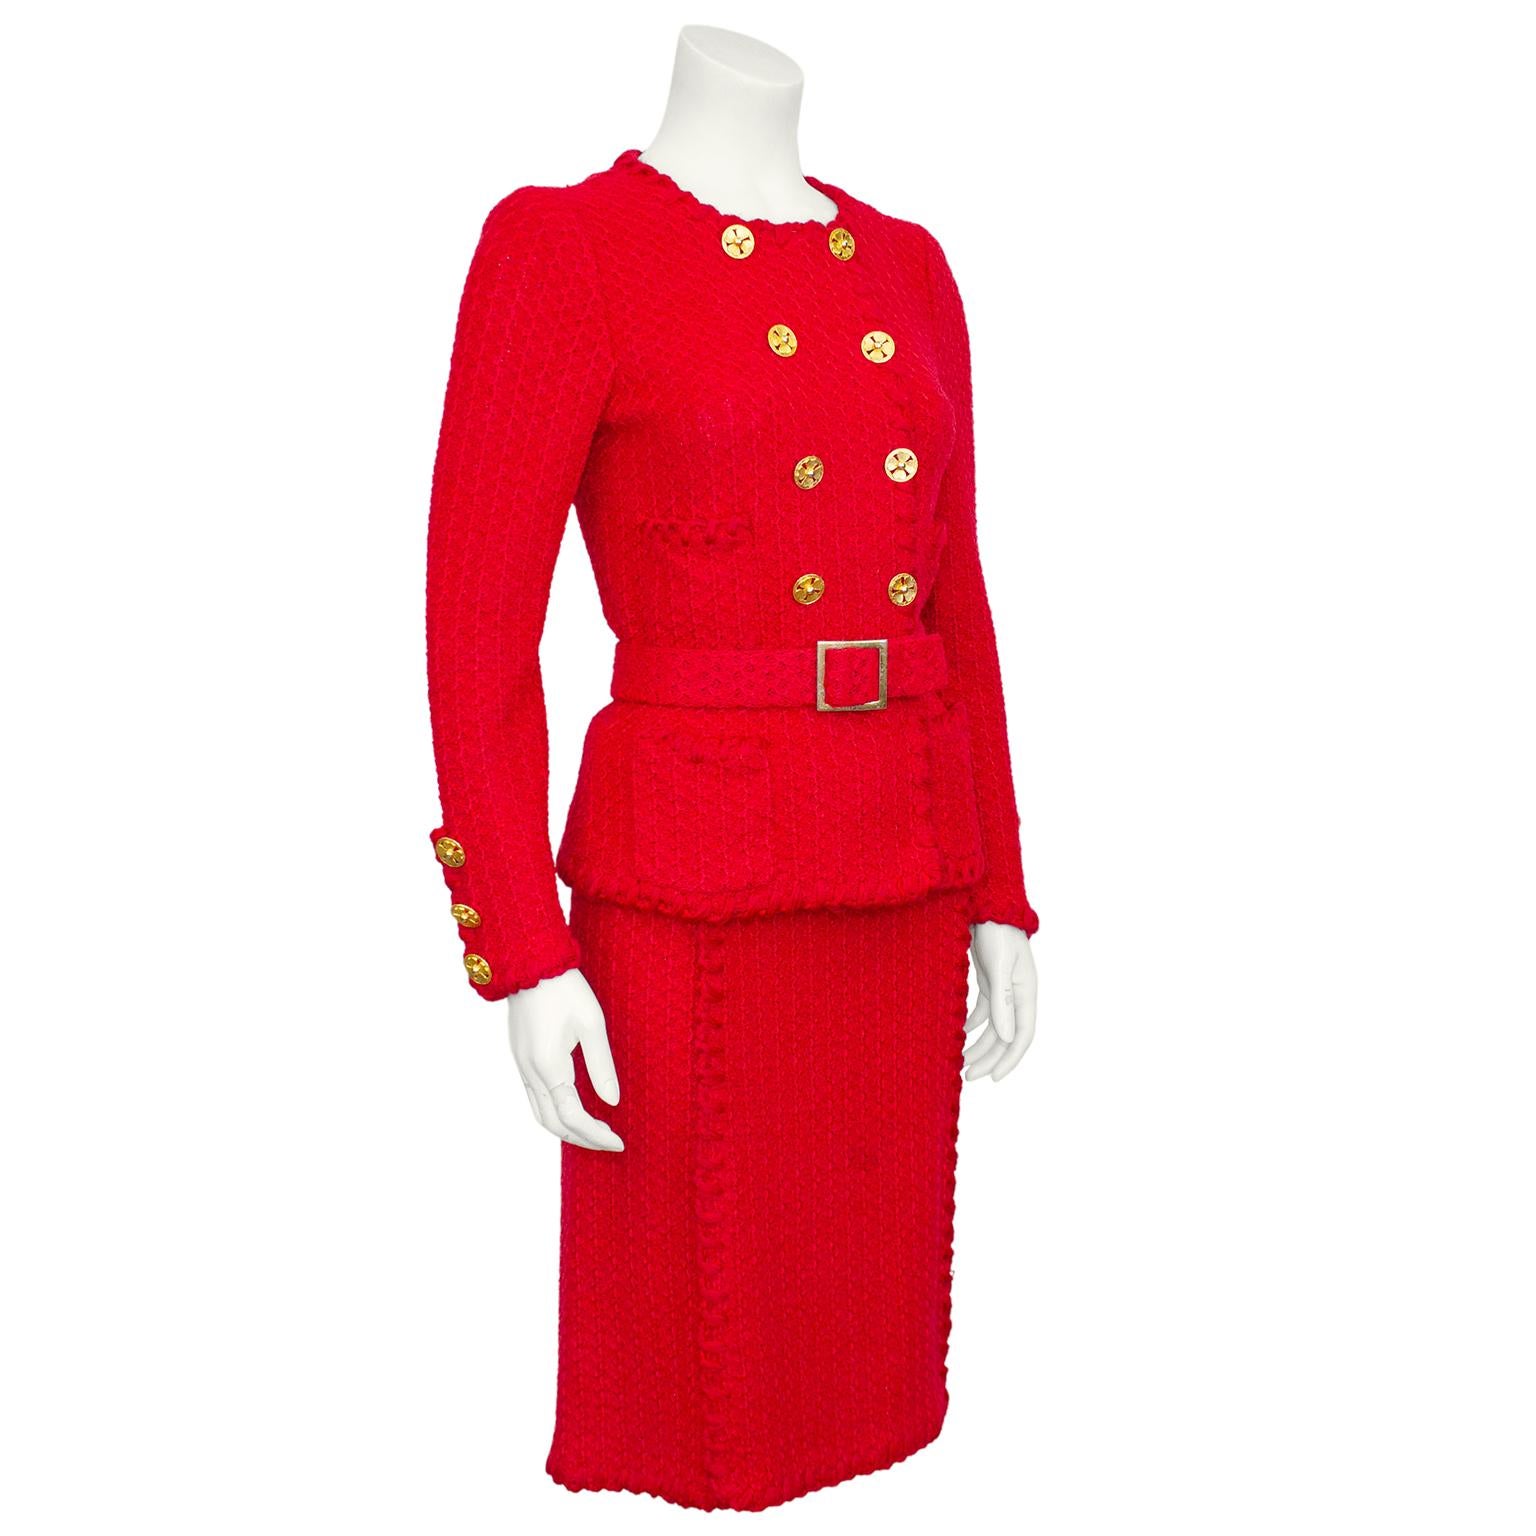 Adolfo red wool knit skirt suit from the 1980s. Double breasted jacket is collarless with gold tone clover buttons and four patch pockets. Optional belt can be worn at waist of jacket. Skirt is classic high waisted with a very slight a line shape.